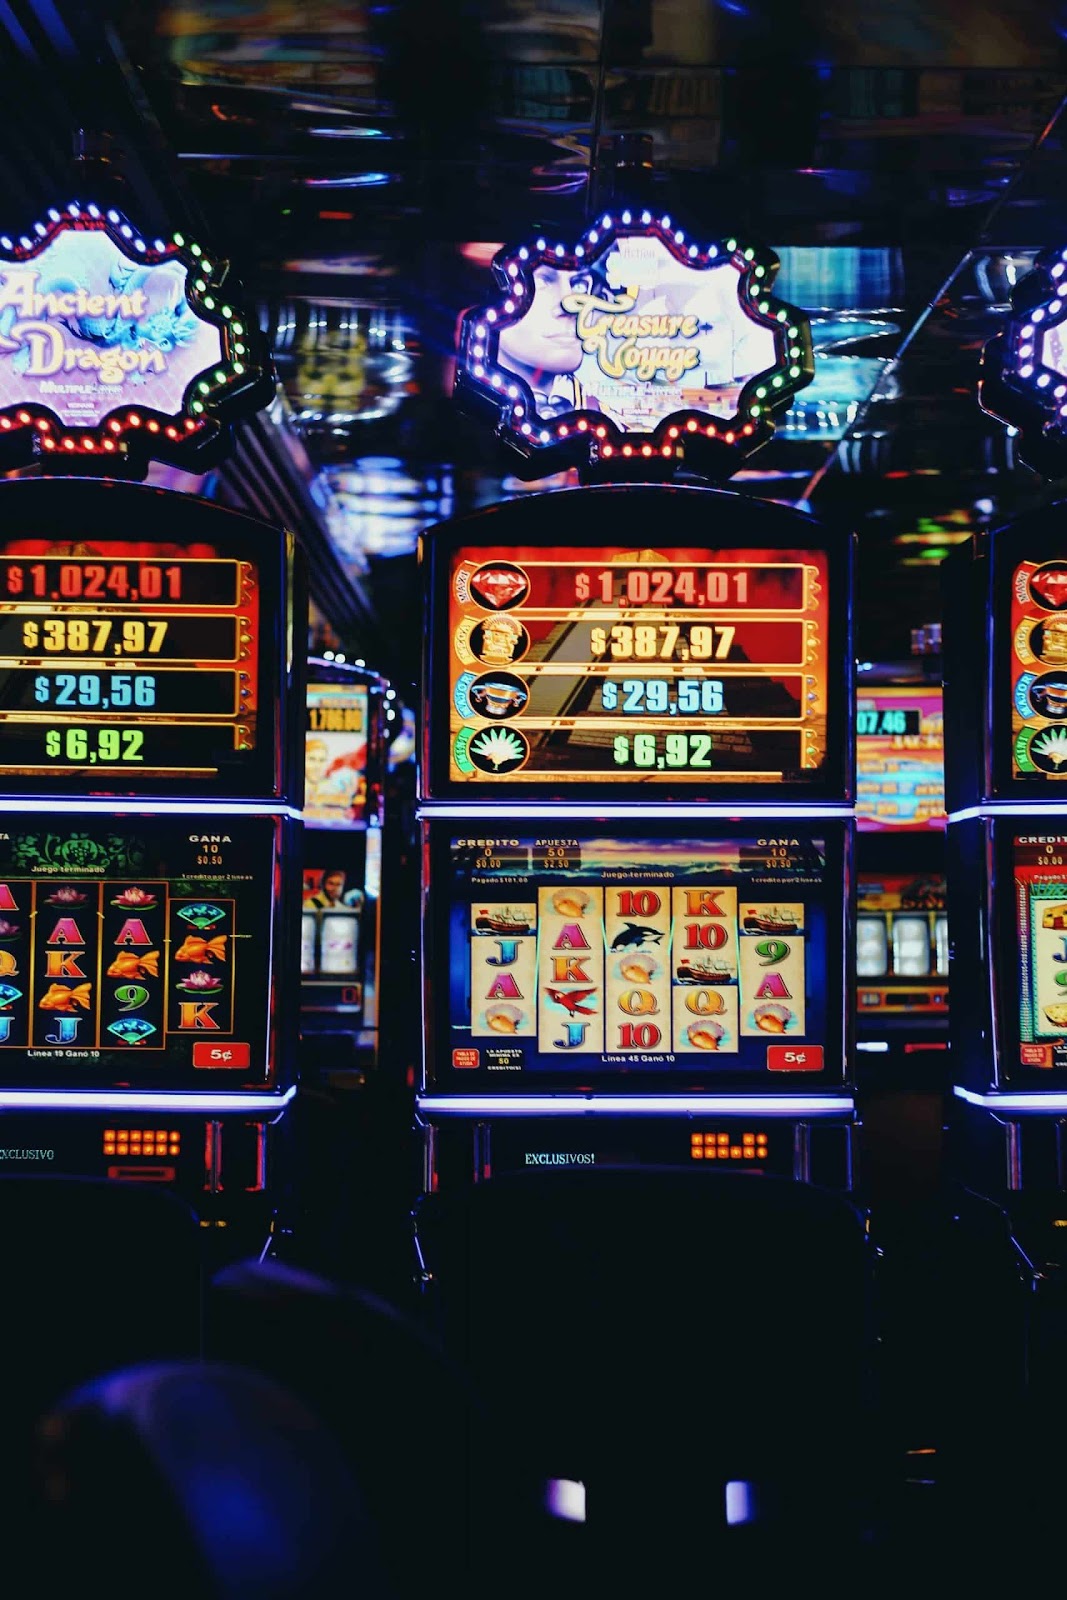 Do online casinos let you win at first